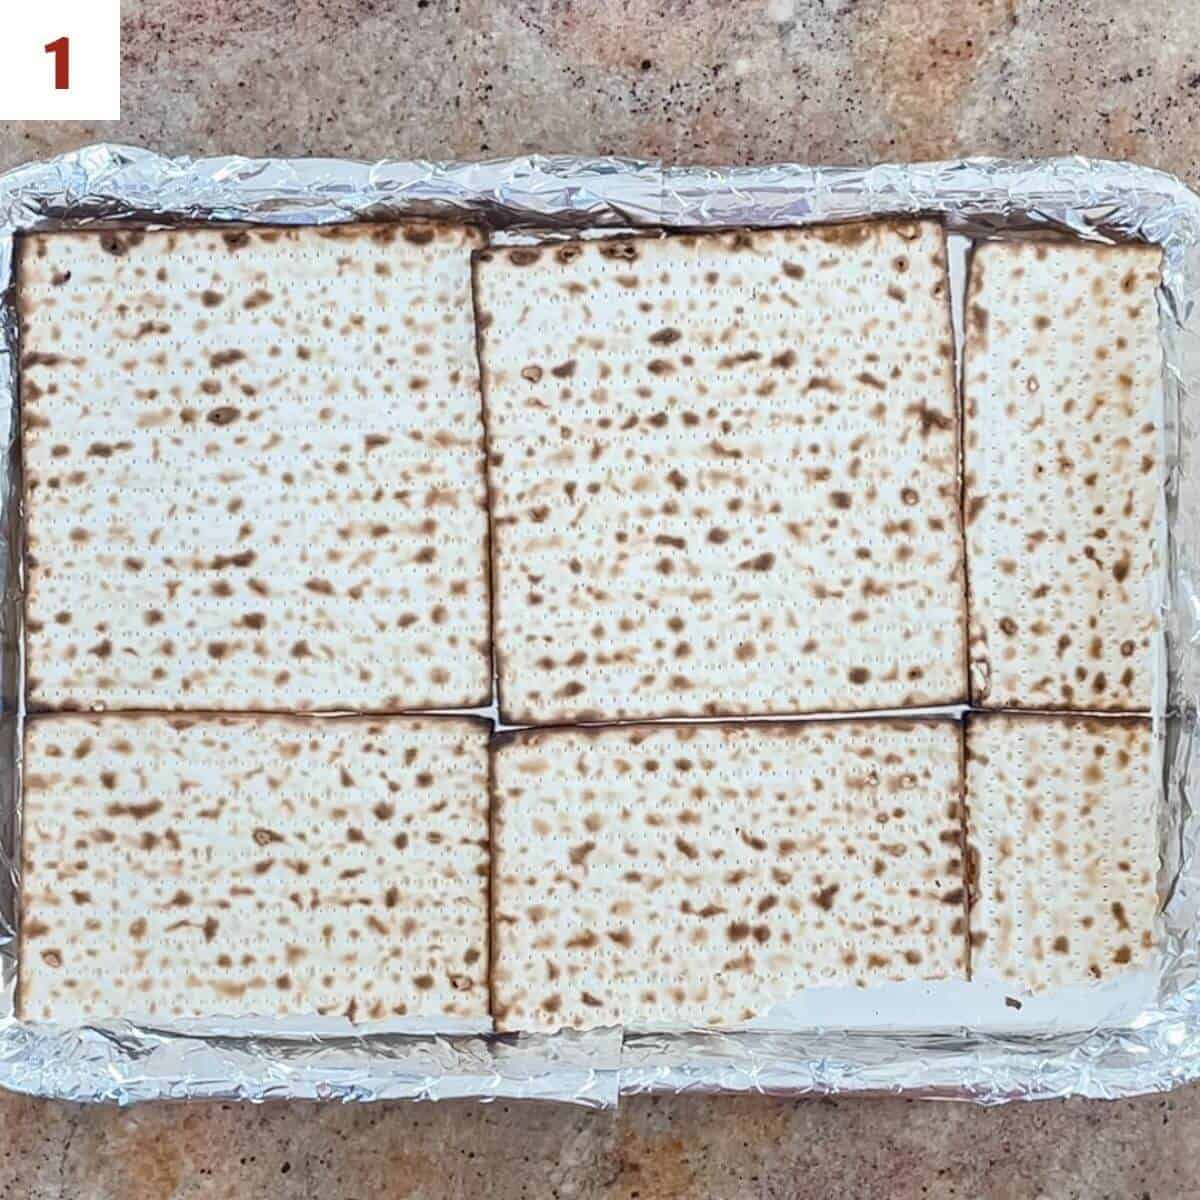 Laying out matzo on a foil-lined baking pan.